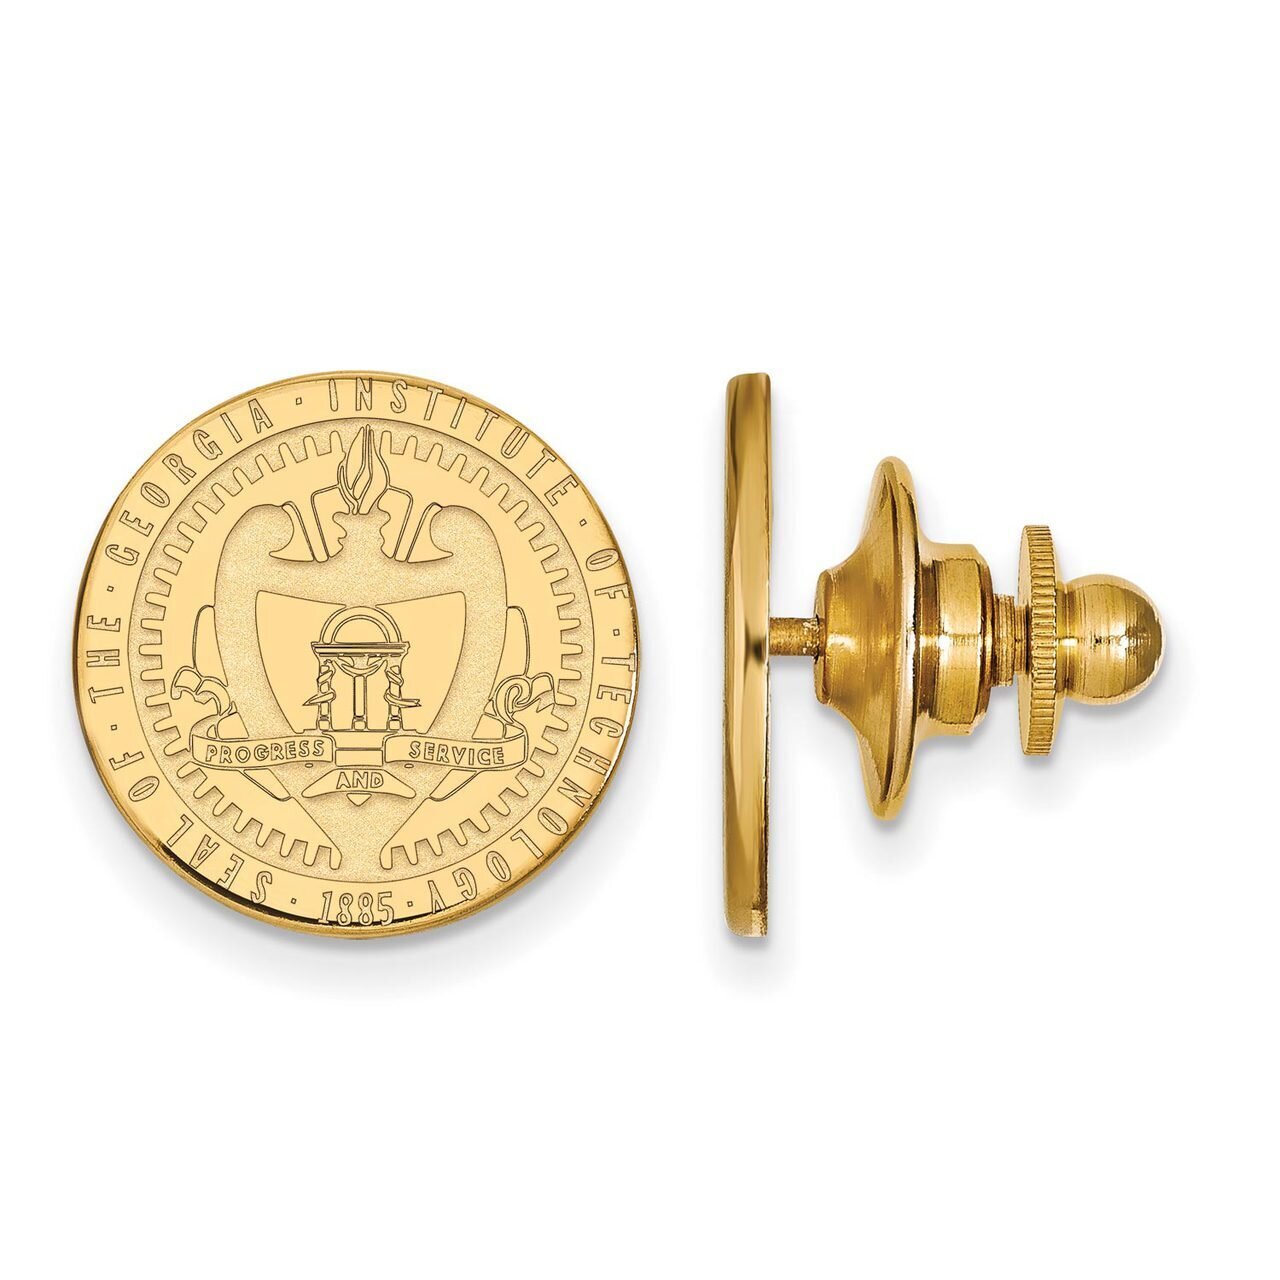 Georgia Institute of Technology Crest Lapel Pin 14k Yellow Gold 4Y057GT